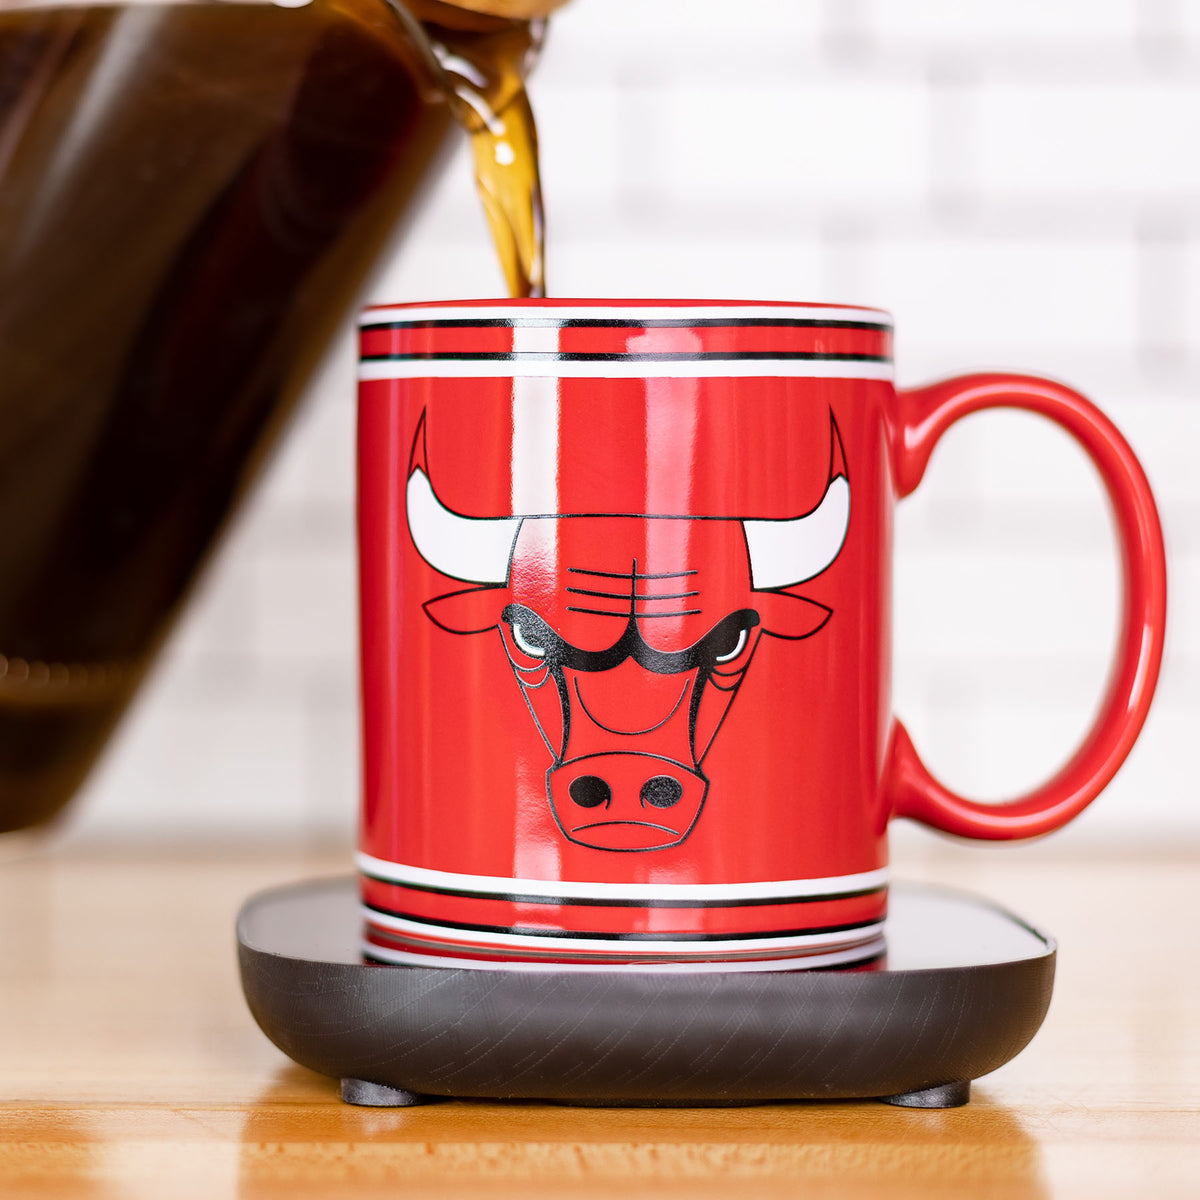 Keep Your Beverage Warm with the Best Mug Warmers